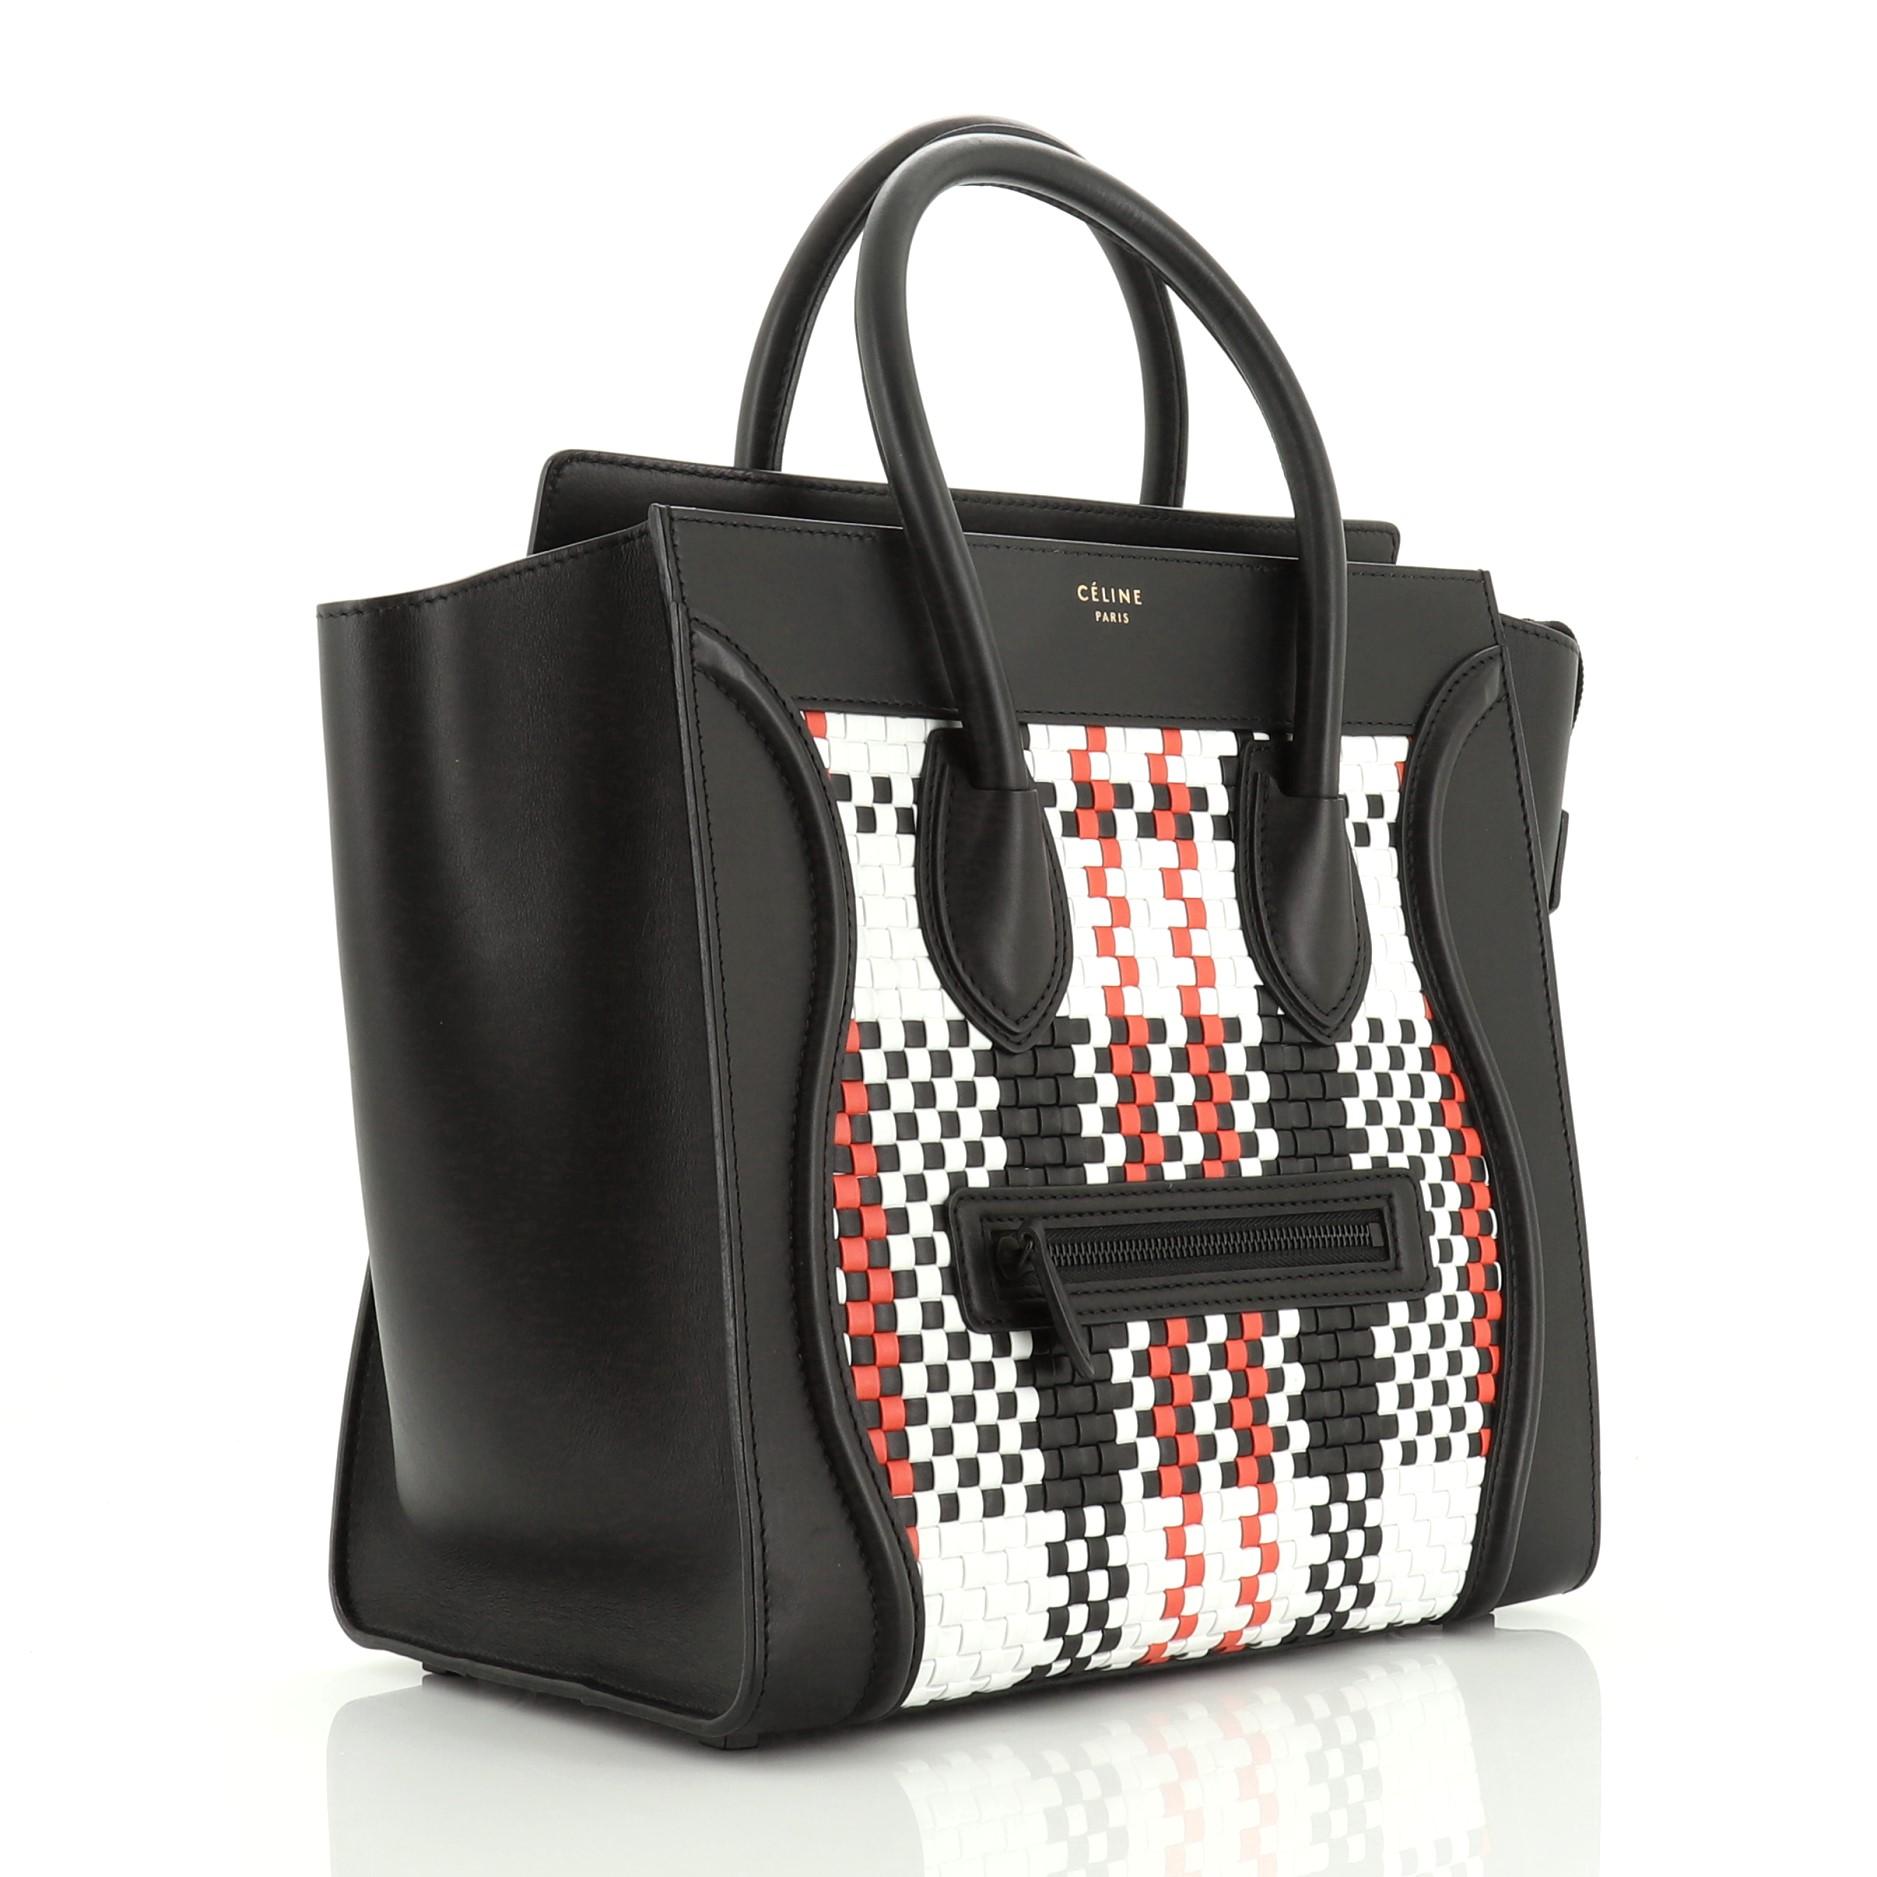 This Celine Luggage Bag Woven Leather Mini, crafted from black, red and white woven leather, features dual rolled handles, exterior front pocket, protective base studs, stamped logo at the center, and black-tone hardware. Its zip closure opens to a